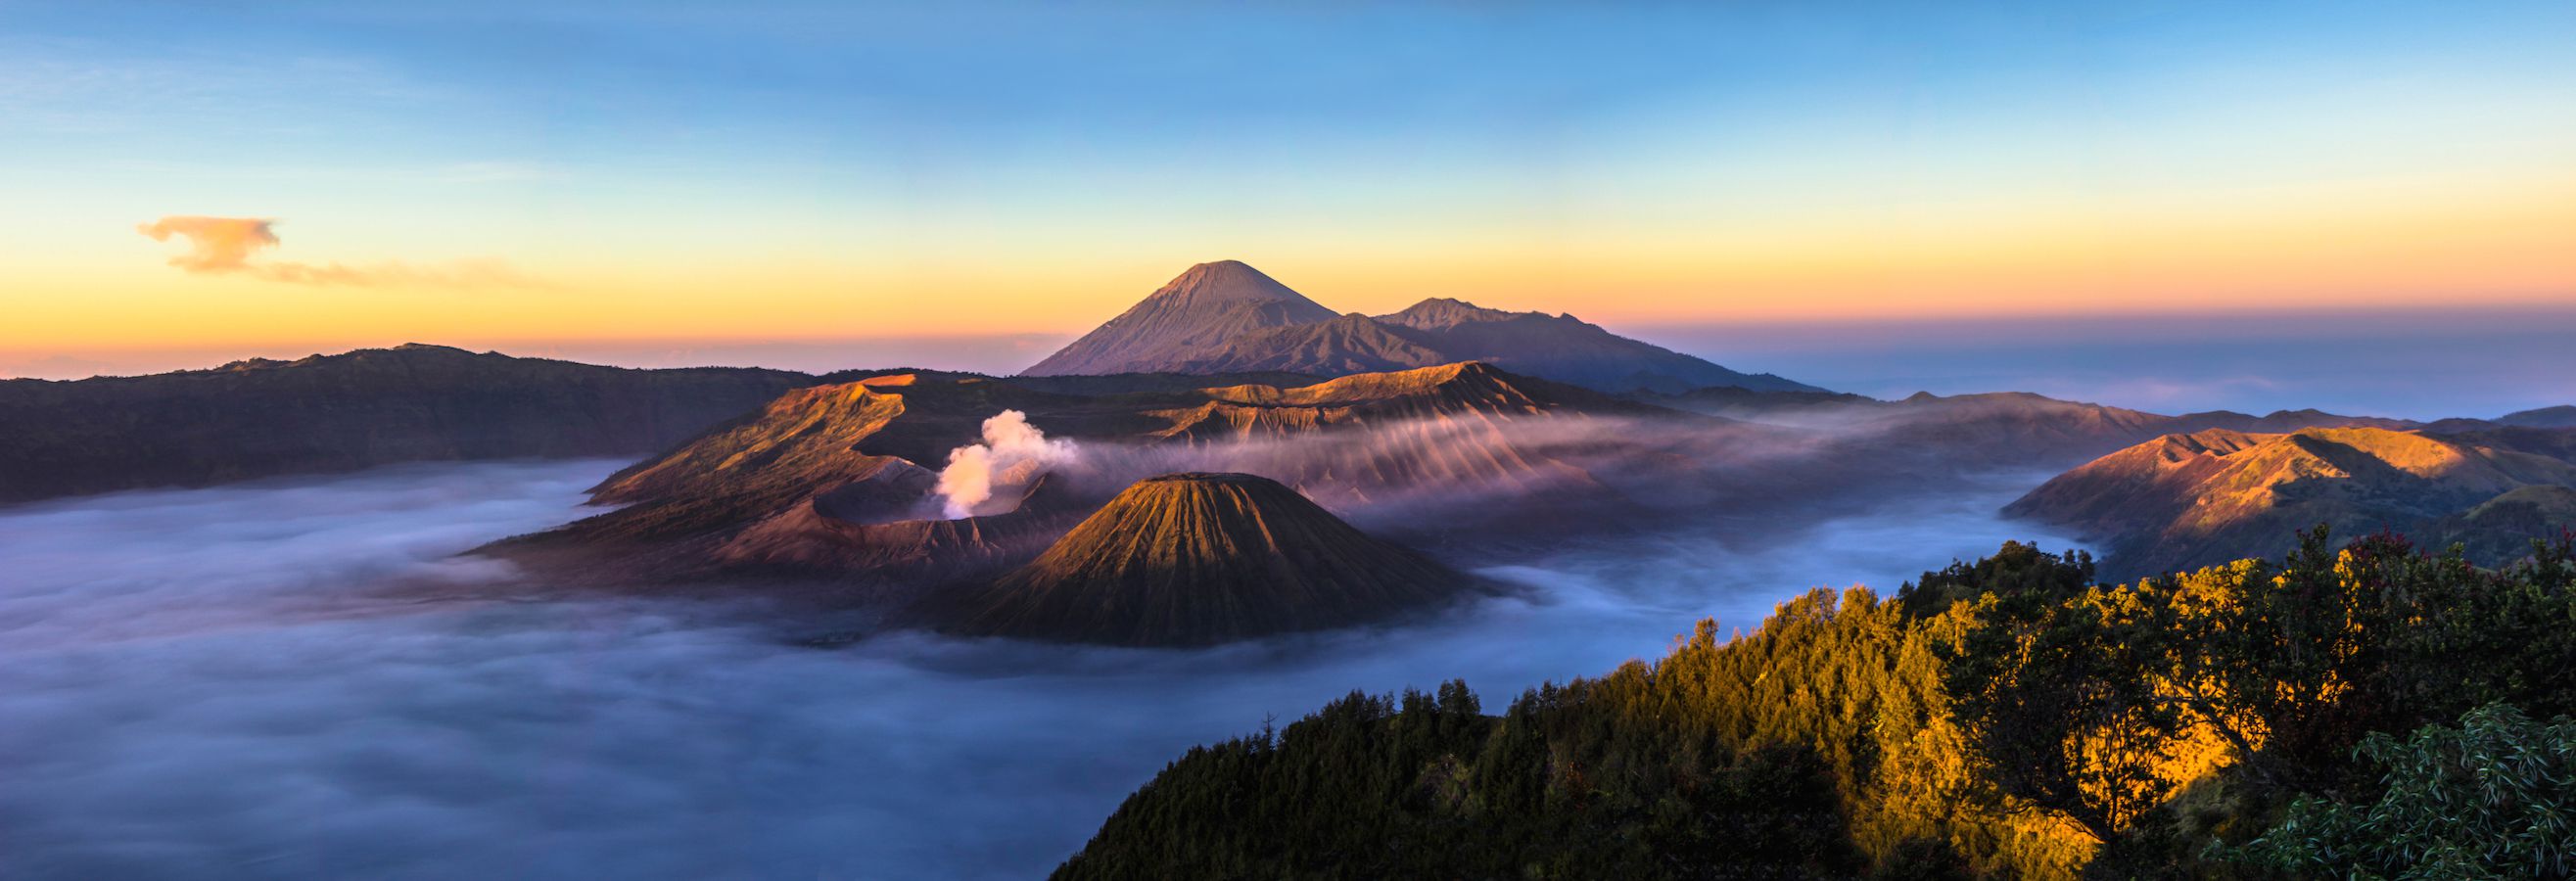 Amazing Mount Bromo Pictures & Backgrounds